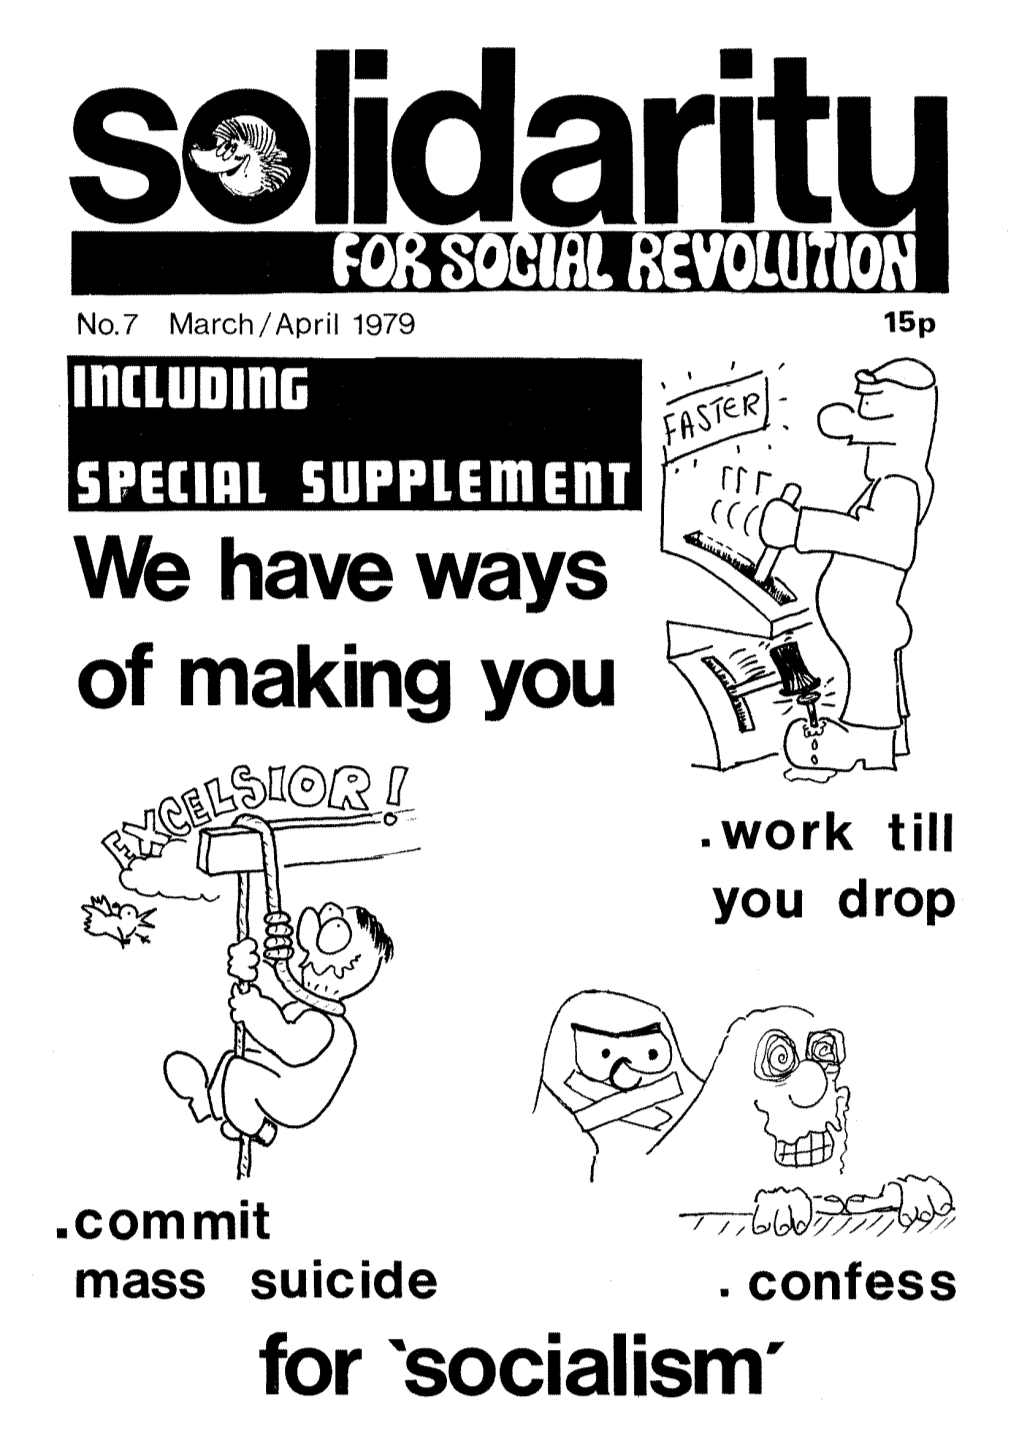 We Have Ways of Making You for 'Socialism'